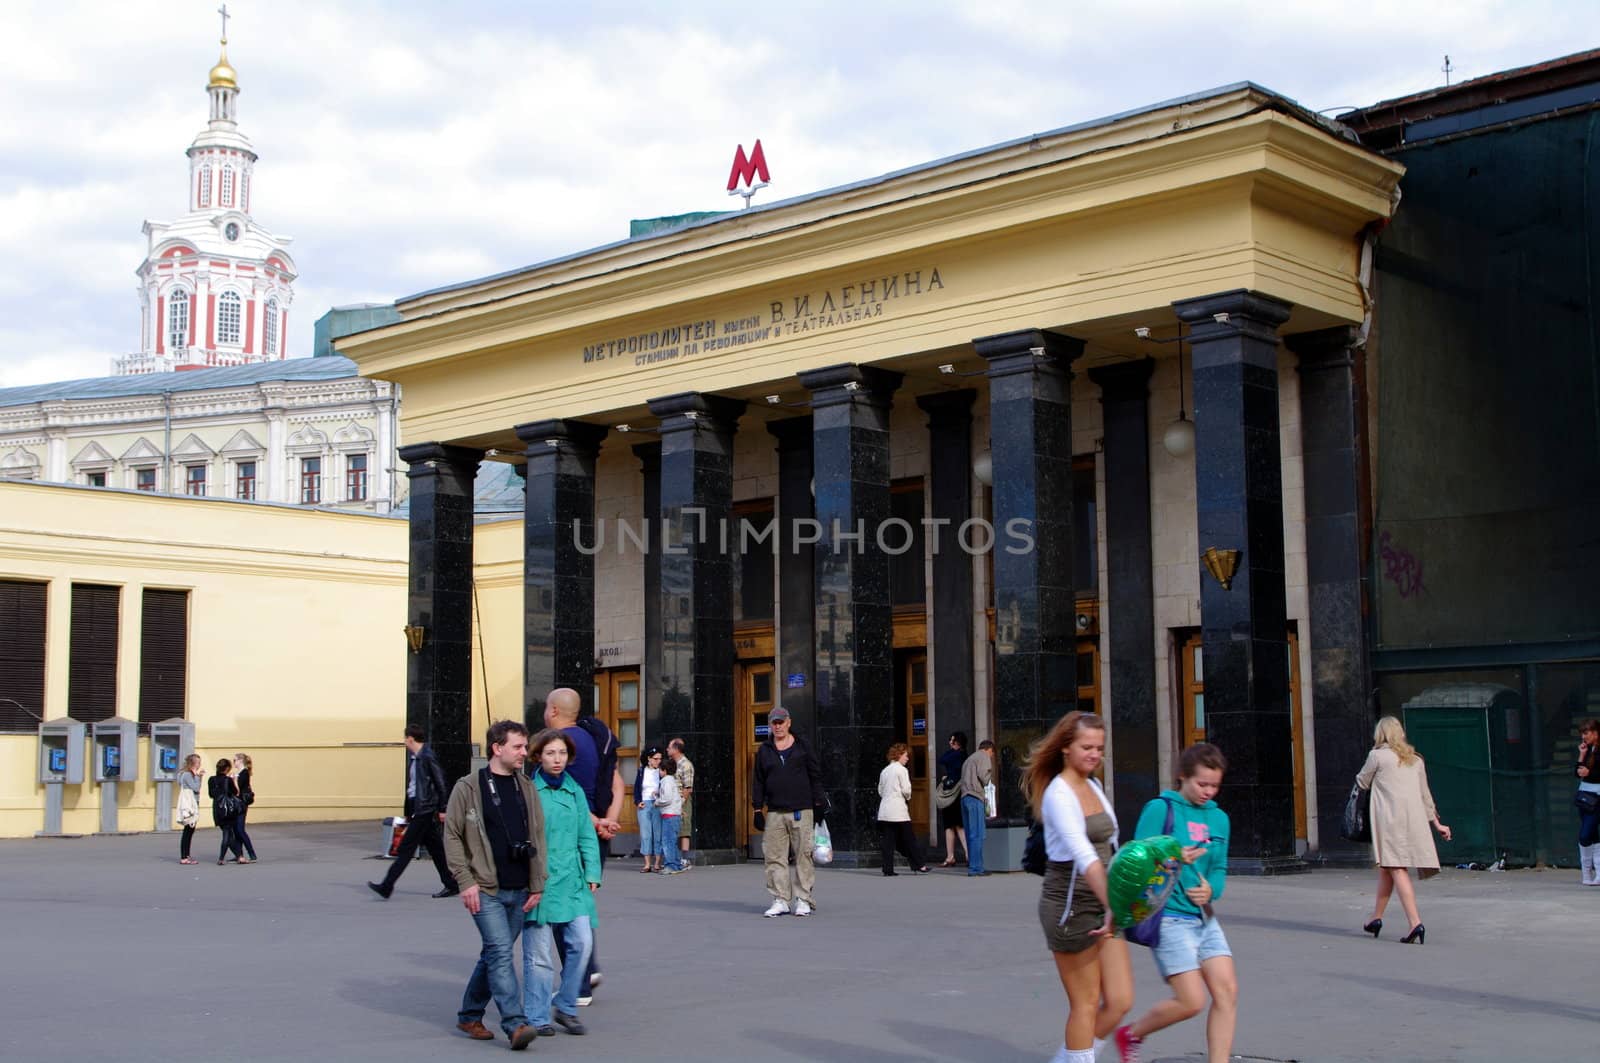 Moscow, Russia - June 14, 2010: Summer day. Peoples walk near the entrance of Teatral'naya metro station on June 14, 2010 in Moscow, Russia by Stoyanov